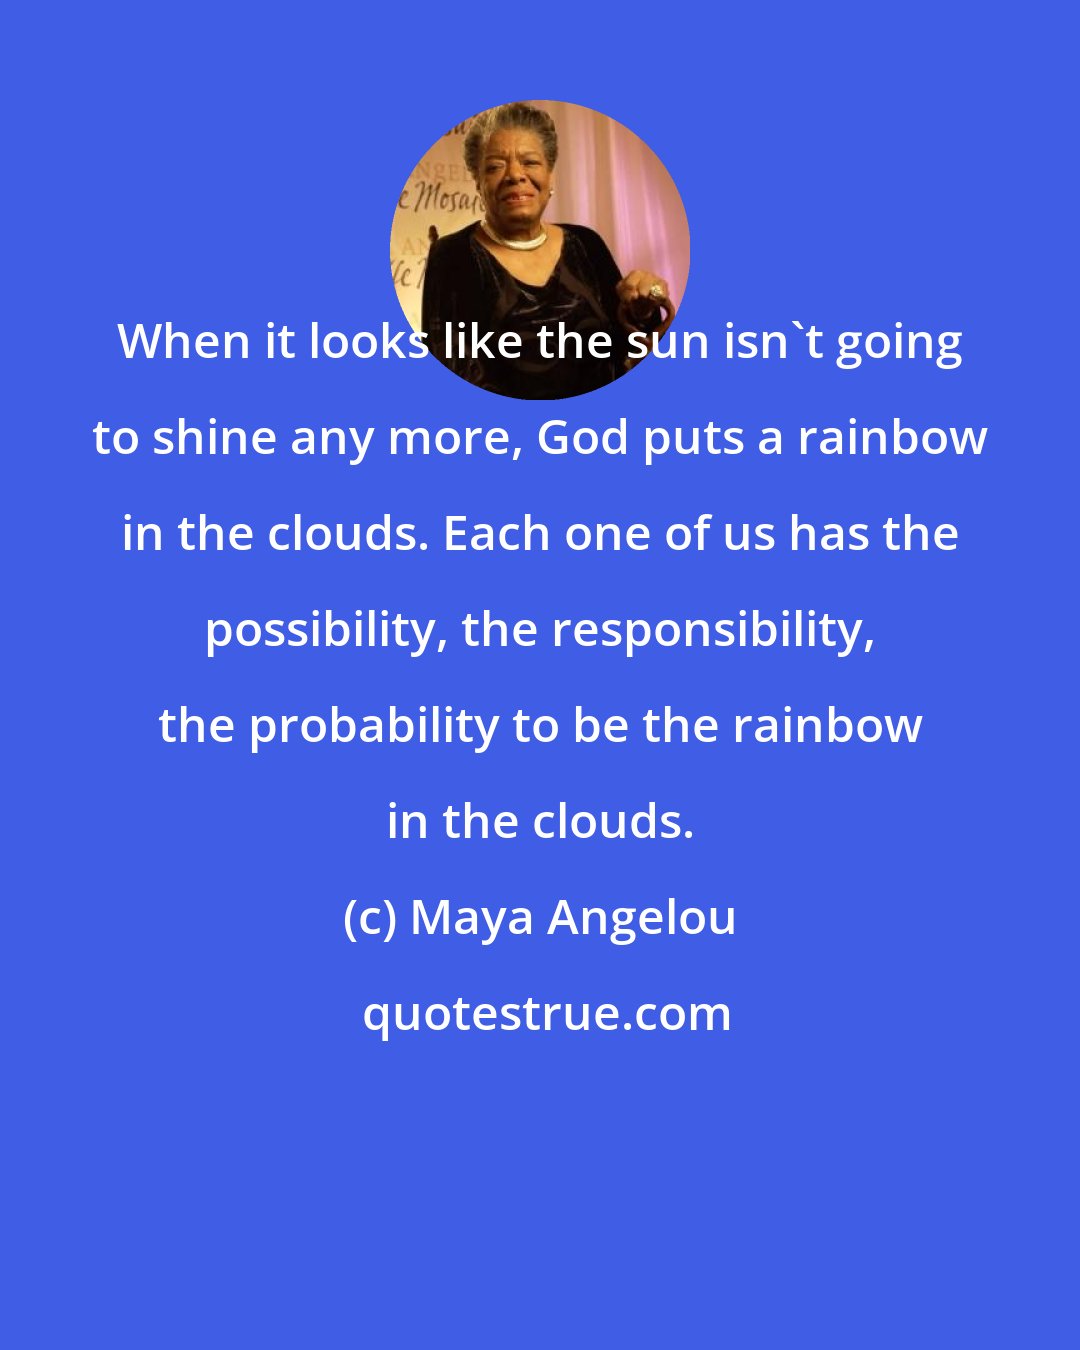 Maya Angelou: When it looks like the sun isn't going to shine any more, God puts a rainbow in the clouds. Each one of us has the possibility, the responsibility, the probability to be the rainbow in the clouds.